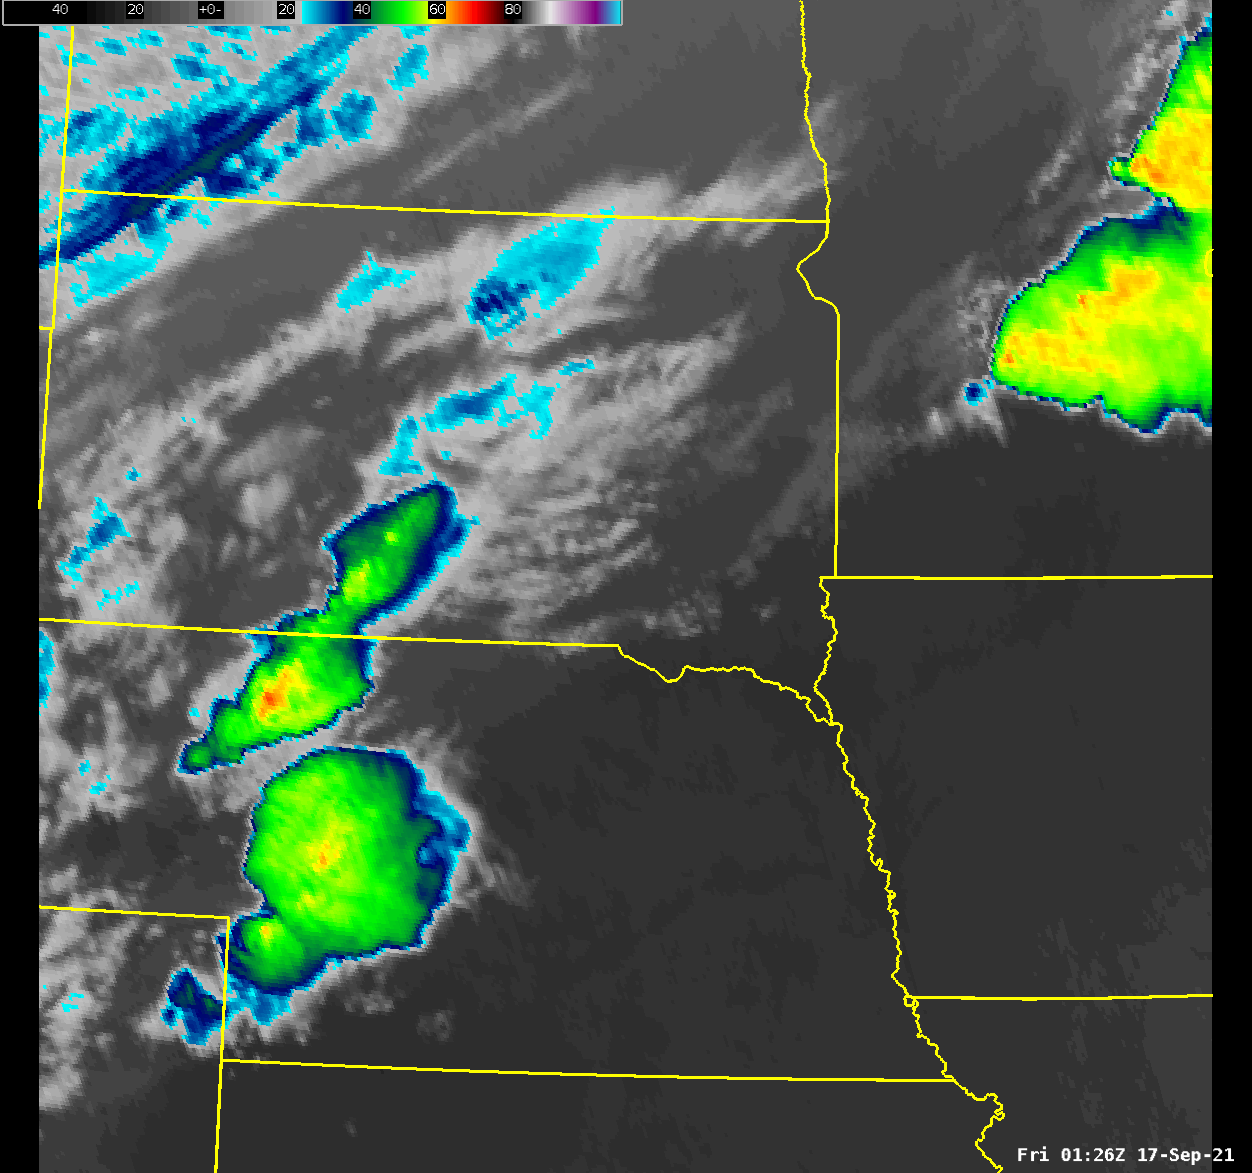 Infrared Satellite loop of storms moving across the Northern Plains on the evening of September 16, 2021